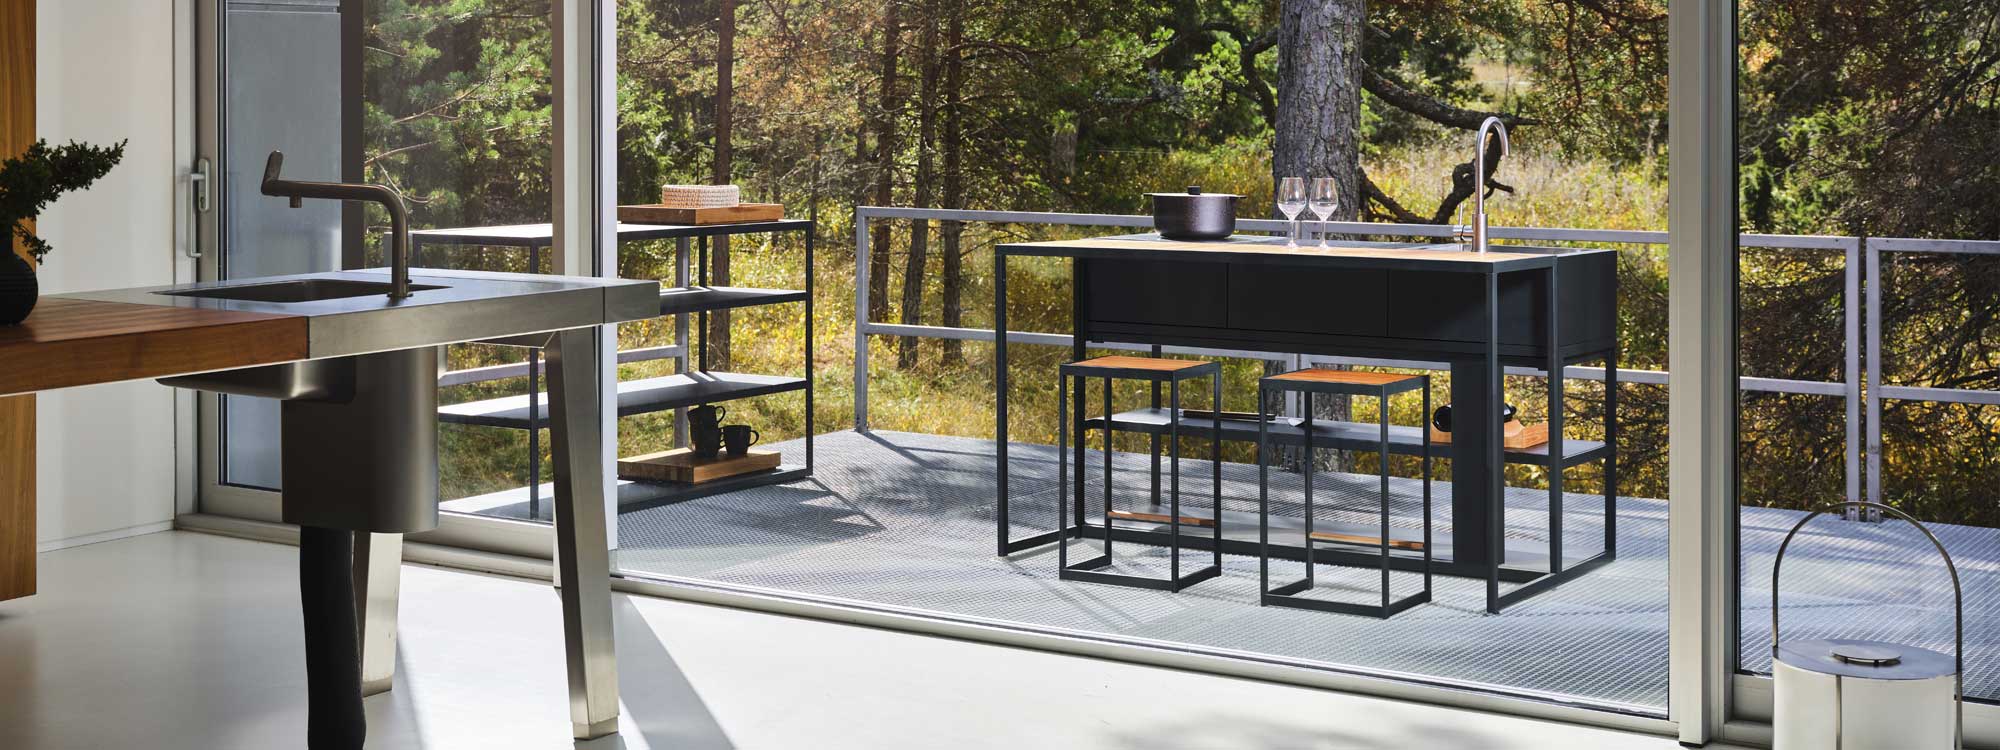 Image of compact outdoor kitchen and bar furniture configuration by Roshults on small terrace